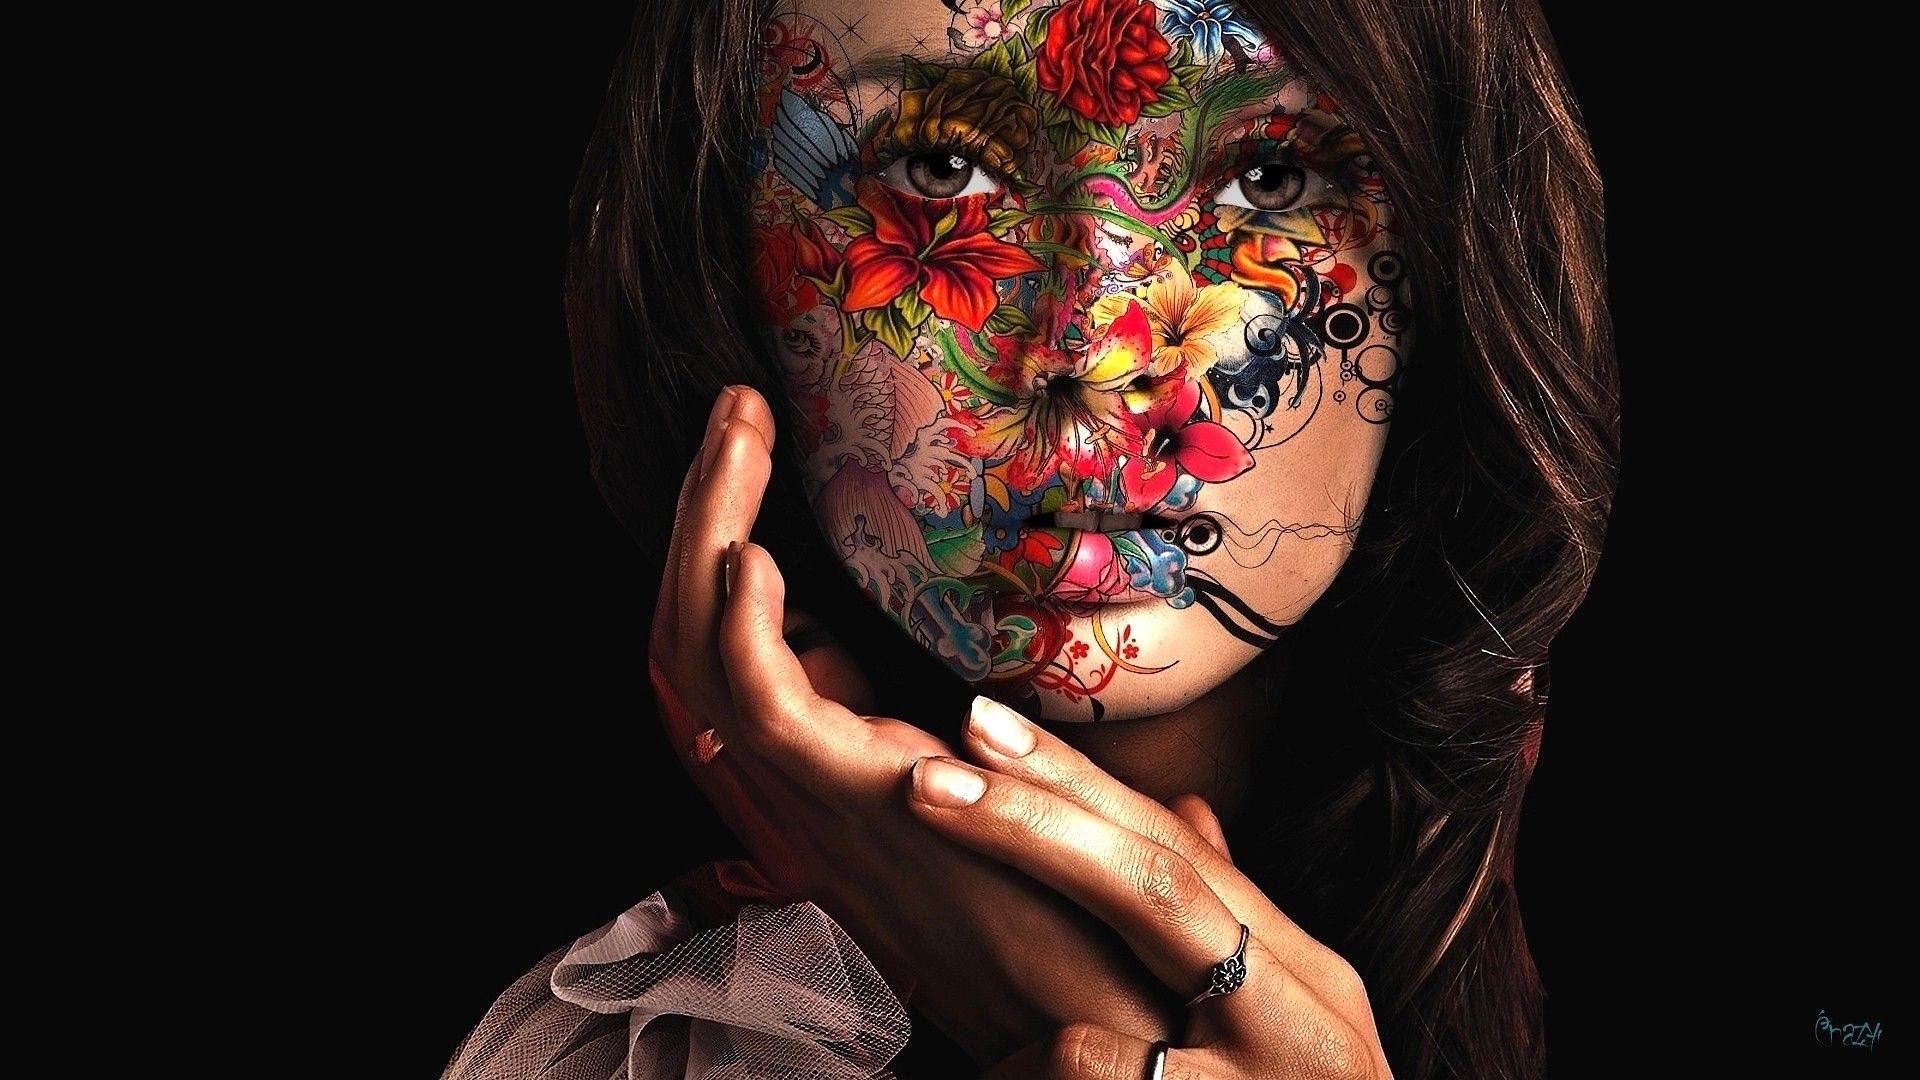 women, paintings, artistic, flowers, paint, faces, painted body, black background, Painted Women, creative wallpaper